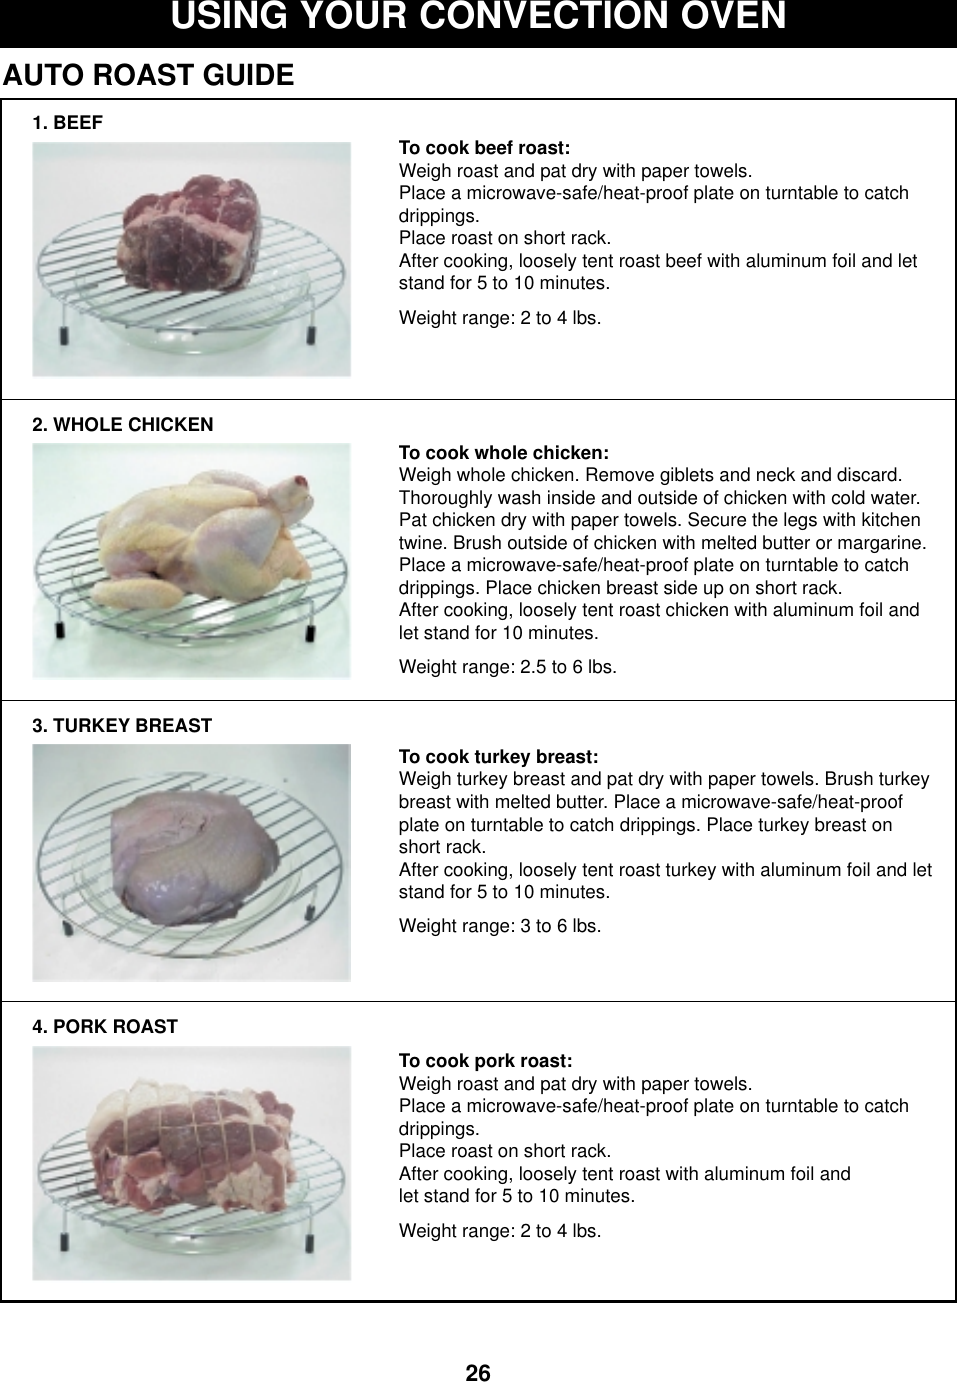 26USING YOUR CONVECTION OVENAUTO ROAST GUIDE1. BEEF2. WHOLE CHICKEN3. TURKEY BREAST4. PORK ROASTTo cook beef roast:Weigh roast and pat dry with paper towels. Place a microwave-safe/heat-proof plate on turntable to catchdrippings.Place roast on short rack.After cooking, loosely tent roast beef with aluminum foil and letstand for 5 to 10 minutes. Weight range: 2 to 4 lbs.To cook whole chicken:Weigh whole chicken. Remove giblets and neck and discard.Thoroughly wash inside and outside of chicken with cold water.Pat chicken dry with paper towels. Secure the legs with kitchentwine. Brush outside of chicken with melted butter or margarine.Place a microwave-safe/heat-proof plate on turntable to catchdrippings. Place chicken breast side up on short rack. After cooking, loosely tent roast chicken with aluminum foil andlet stand for 10 minutes. Weight range: 2.5 to 6 lbs.To cook turkey breast: Weigh turkey breast and pat dry with paper towels. Brush turkeybreast with melted butter. Place a microwave-safe/heat-proofplate on turntable to catch drippings. Place turkey breast onshort rack.After cooking, loosely tent roast turkey with aluminum foil and letstand for 5 to 10 minutes.Weight range: 3 to 6 lbs.To cook pork roast: Weigh roast and pat dry with paper towels.Place a microwave-safe/heat-proof plate on turntable to catchdrippings.Place roast on short rack. After cooking, loosely tent roast with aluminum foil andlet stand for 5 to 10 minutes.Weight range: 2 to 4 lbs.